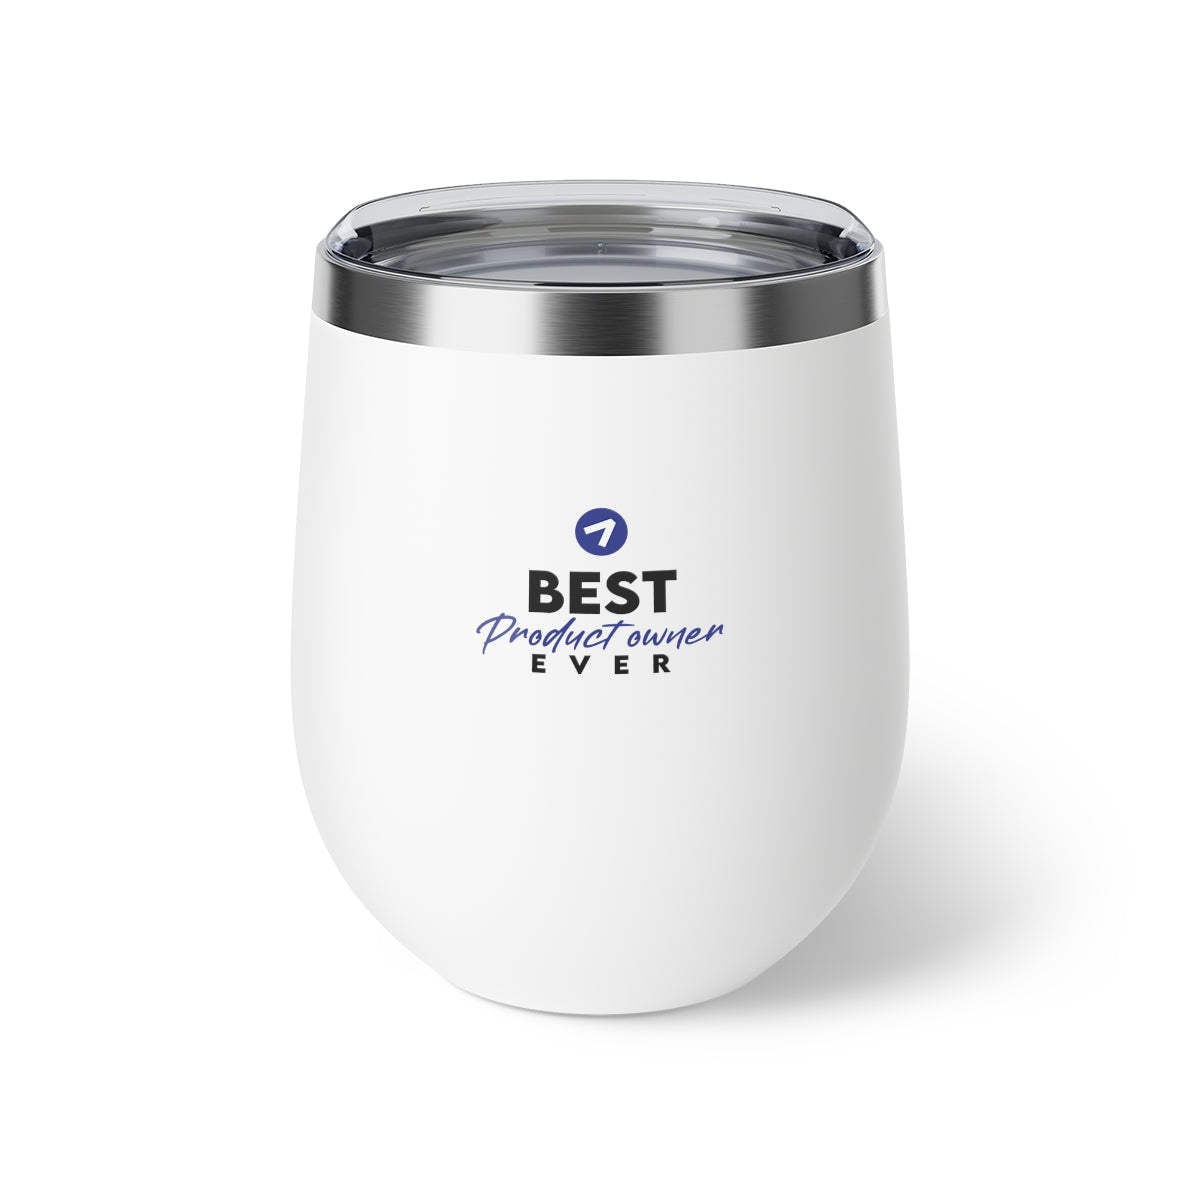 Best Product Owner ever - Dark blue - Copper Vacuum Insulated Cup, 12oz